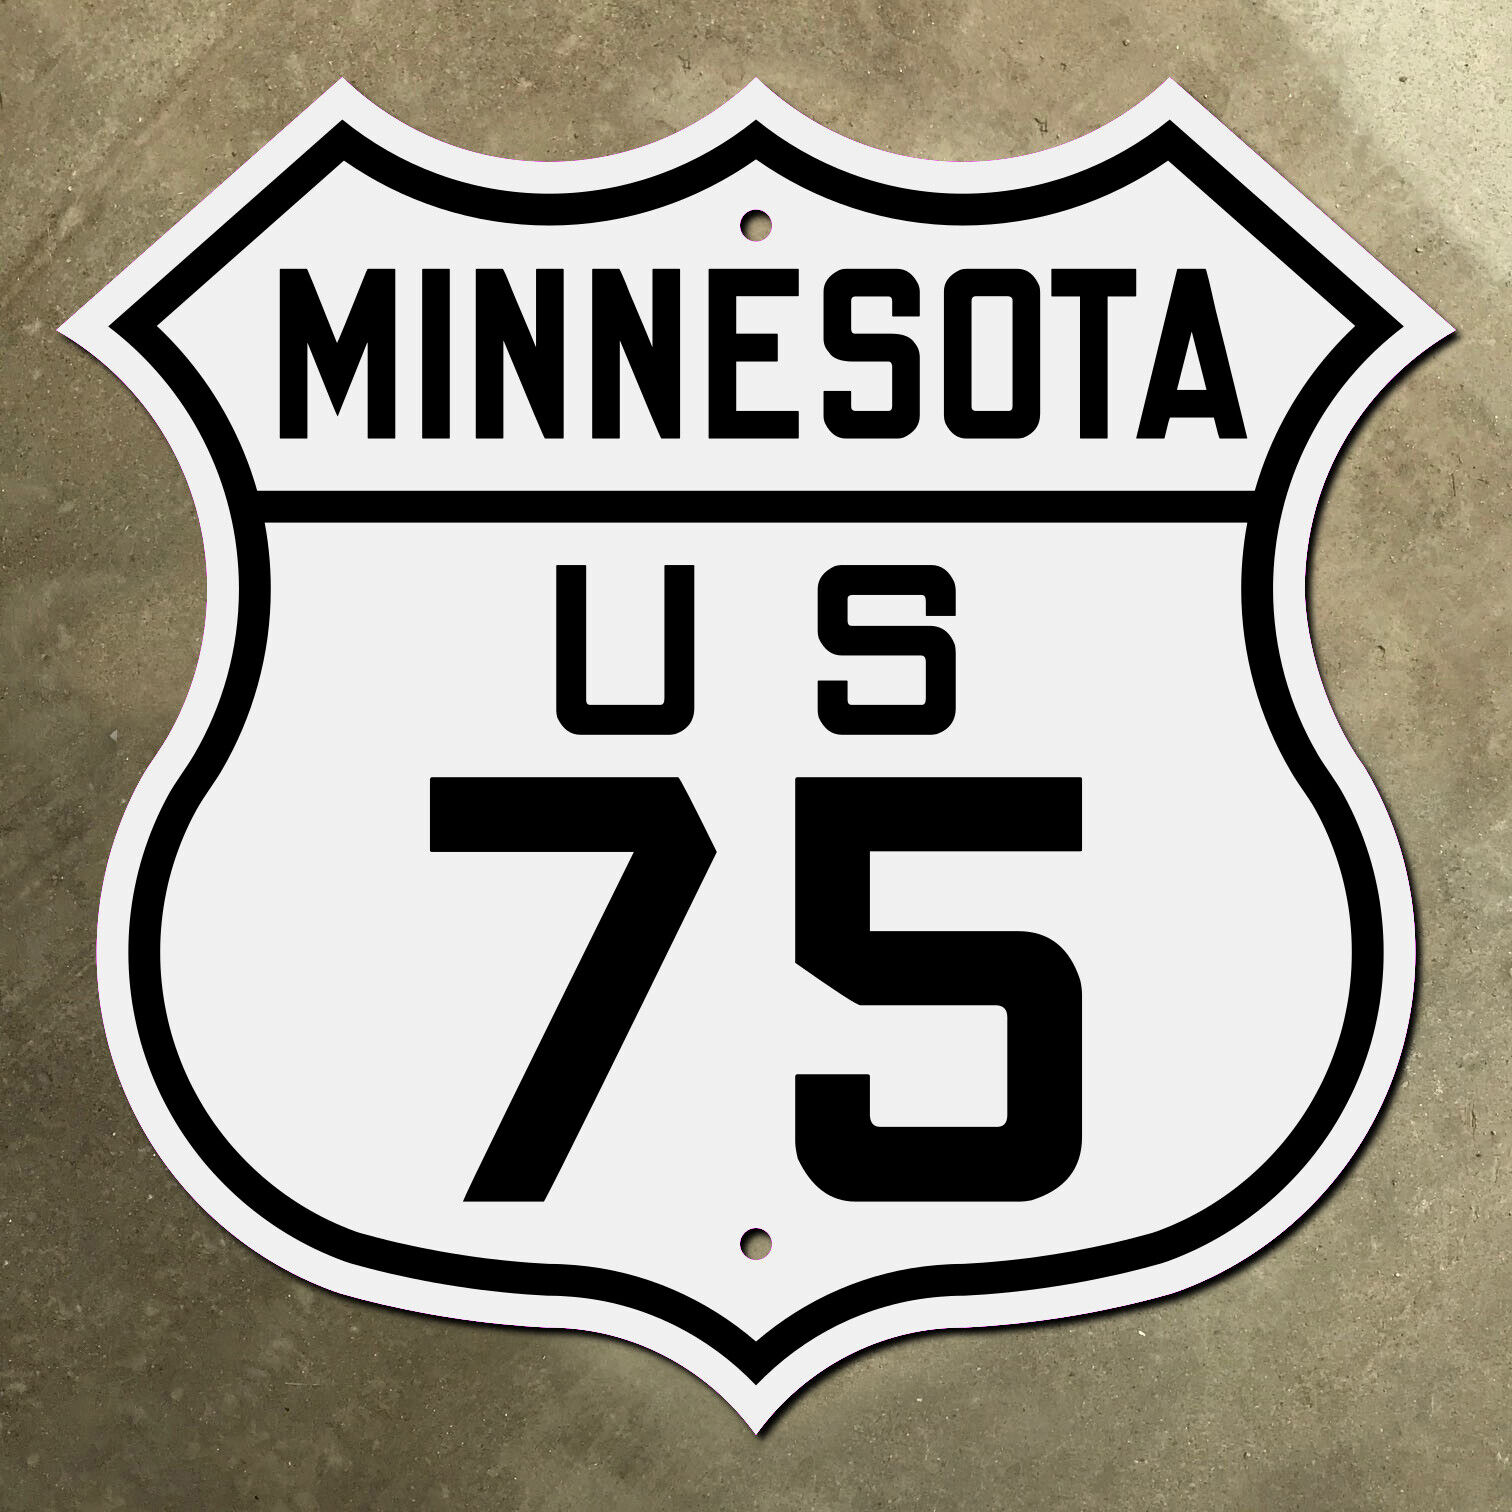 Minnesota US route 75 highway marker road sign Moorhead 1926 King of Trails